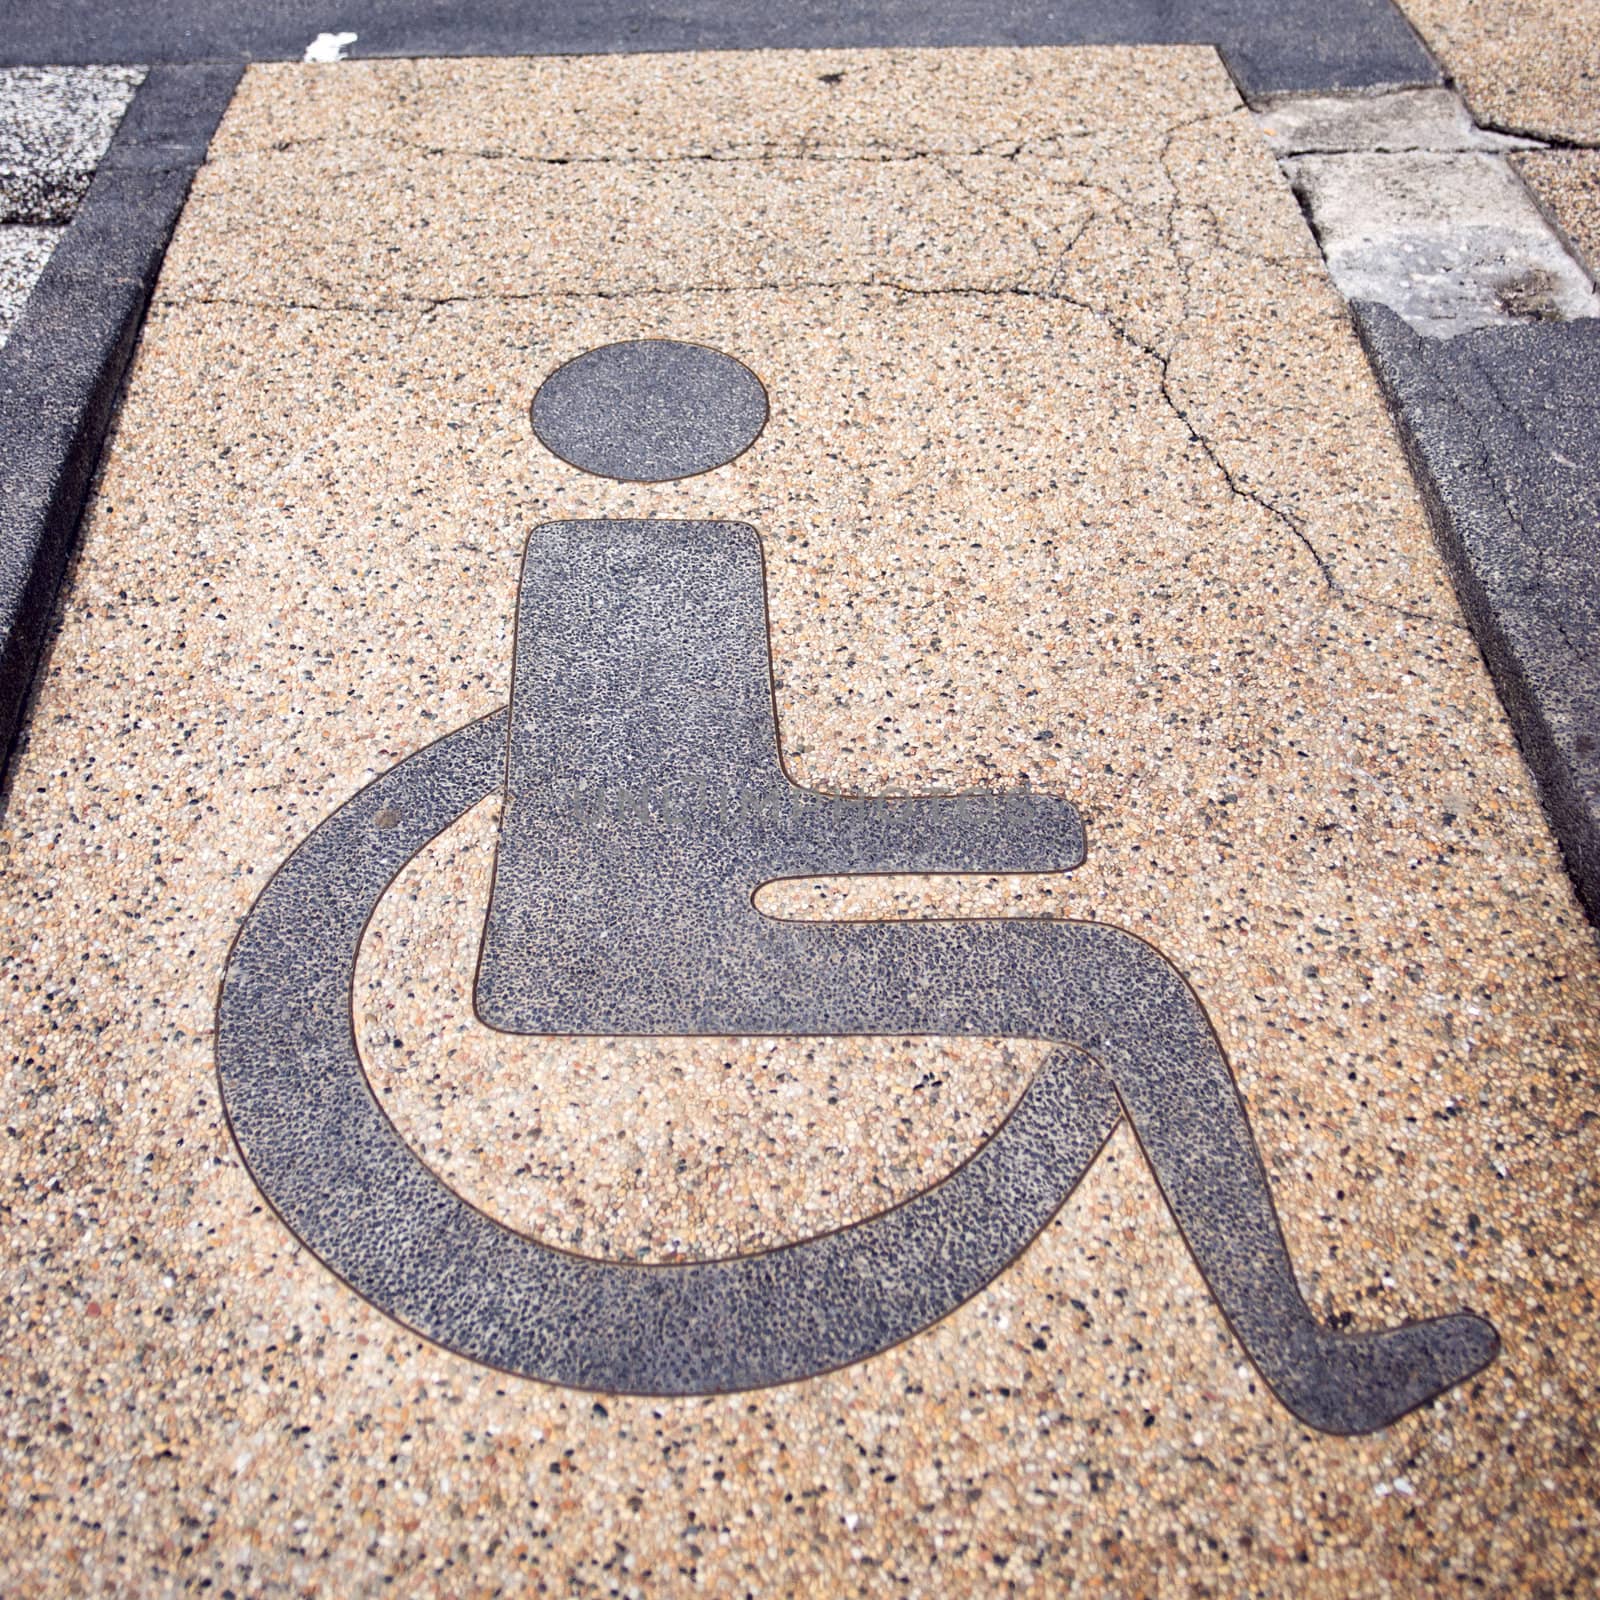 Disabled sign by timbrk